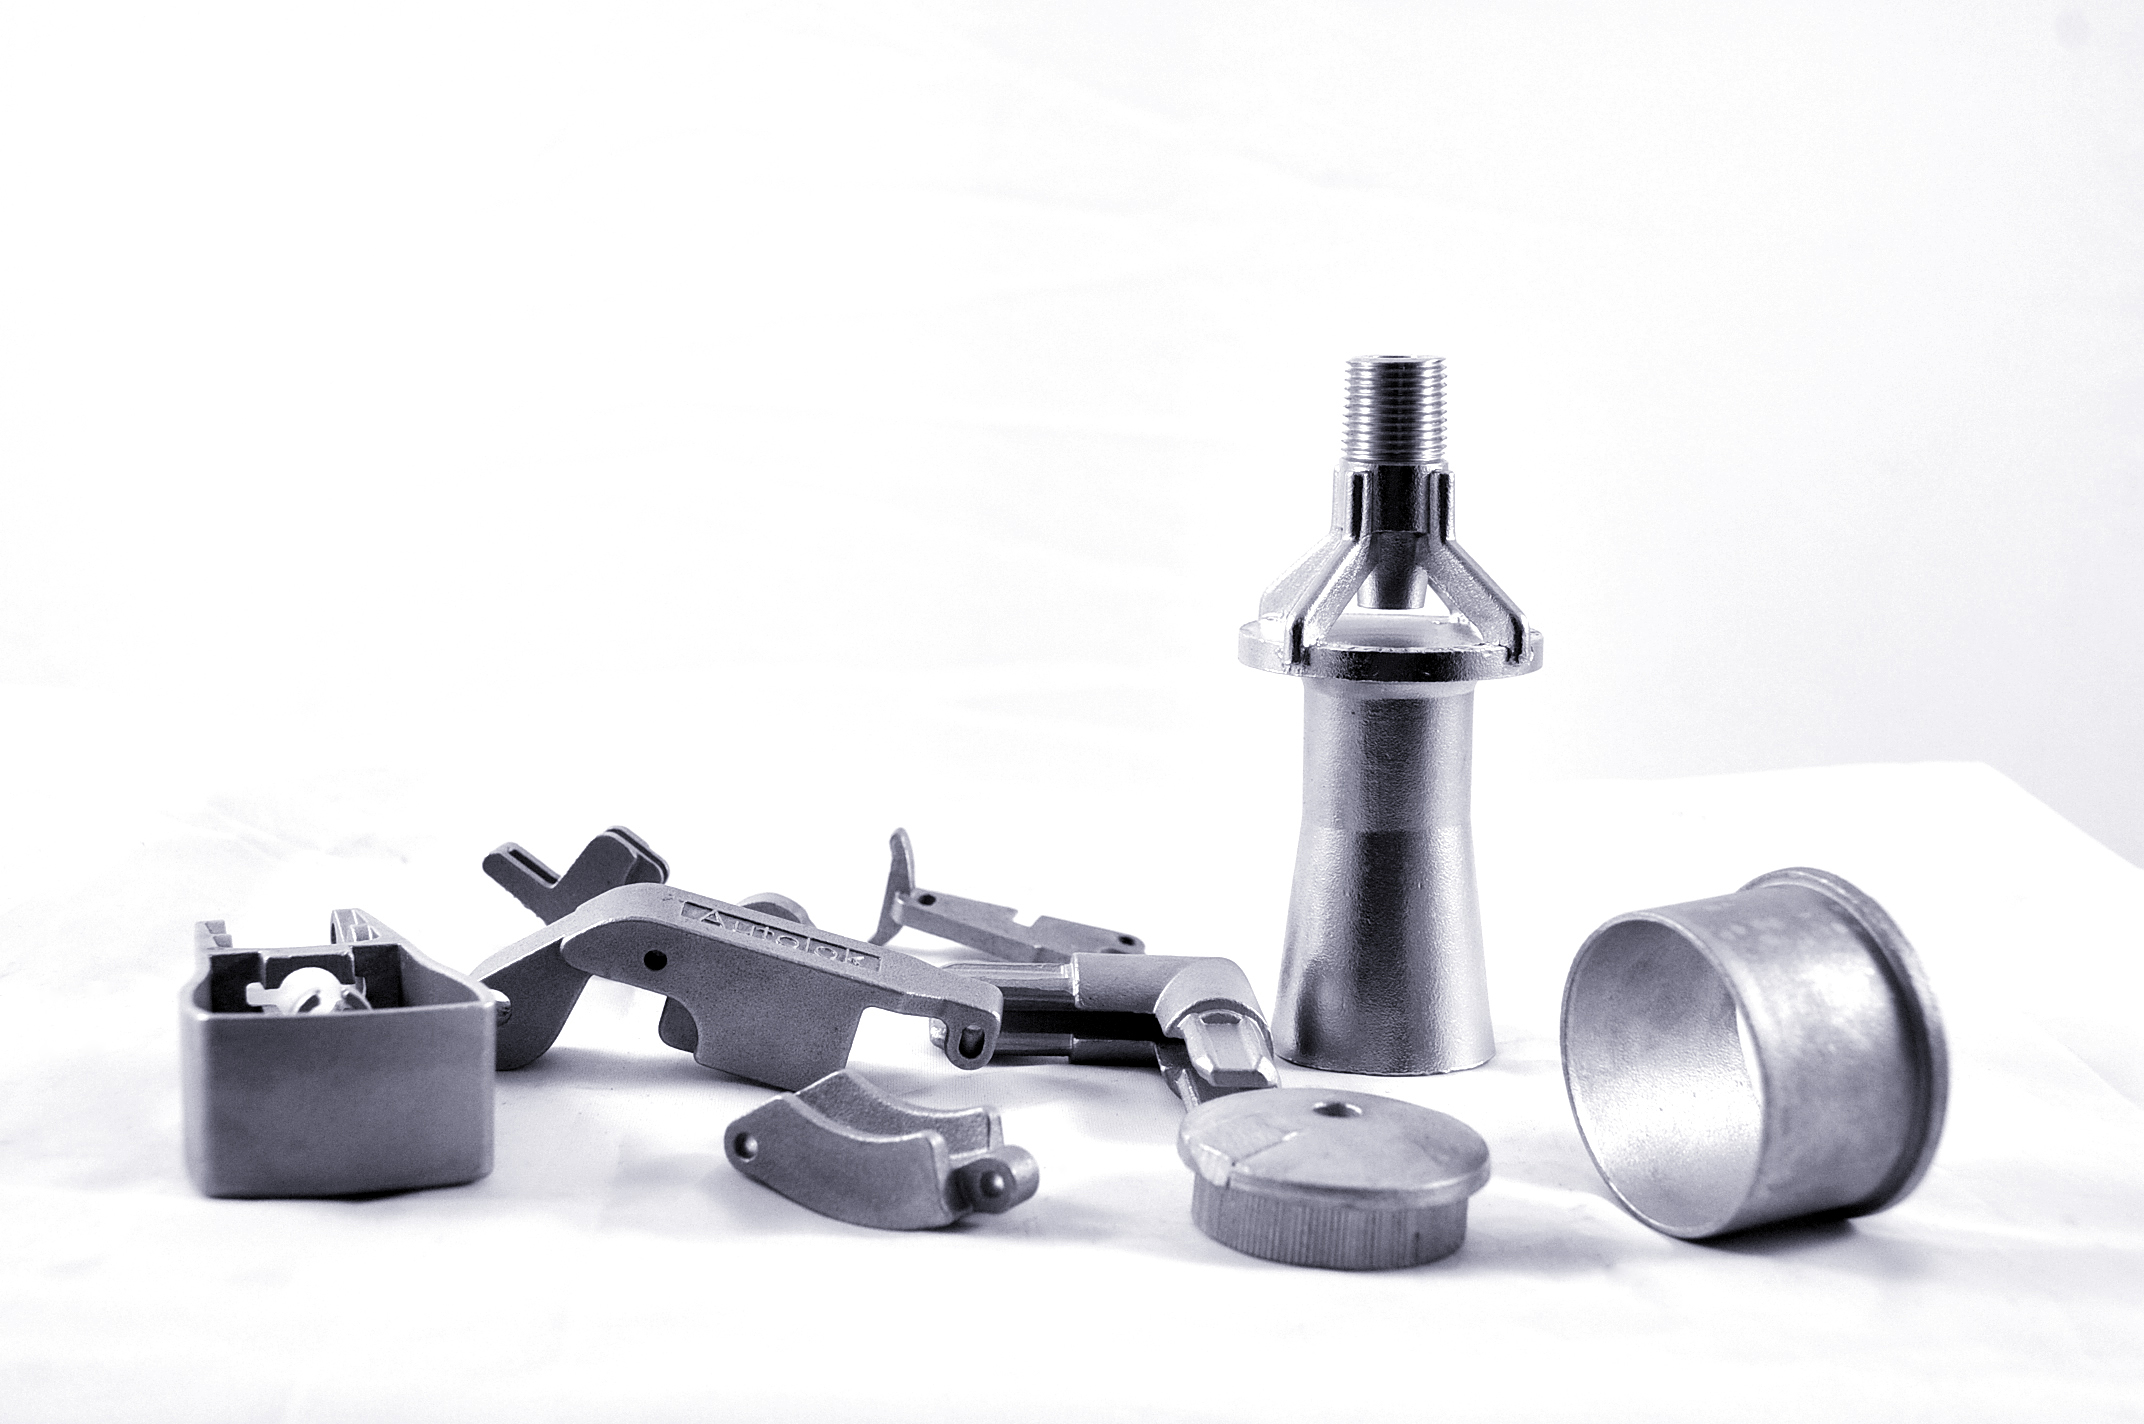 Metal Casting Market Size Is Set To Experience Revolutionary Growth By 2031 - EIN Presswire